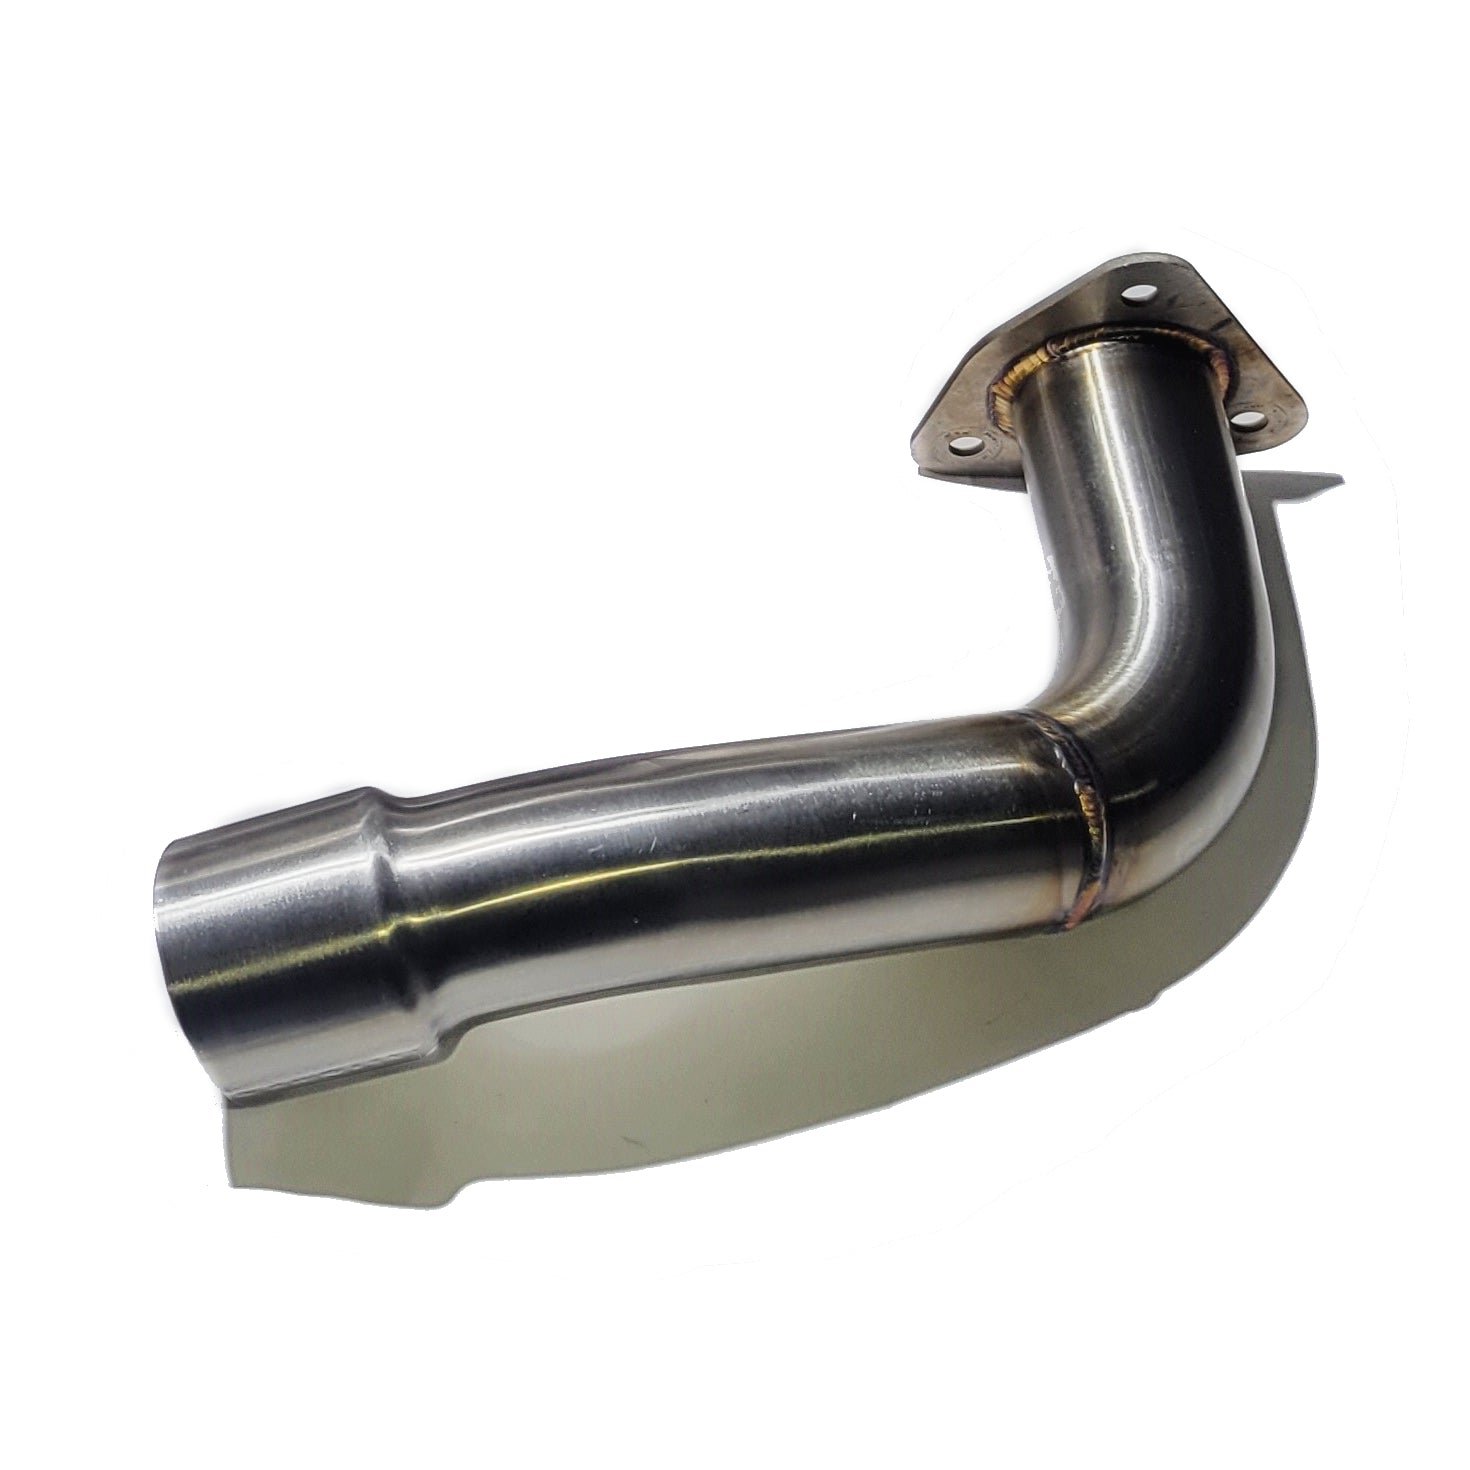 2020-2023 Can Am Defender 1000 Magnum Slip-On Exhaust